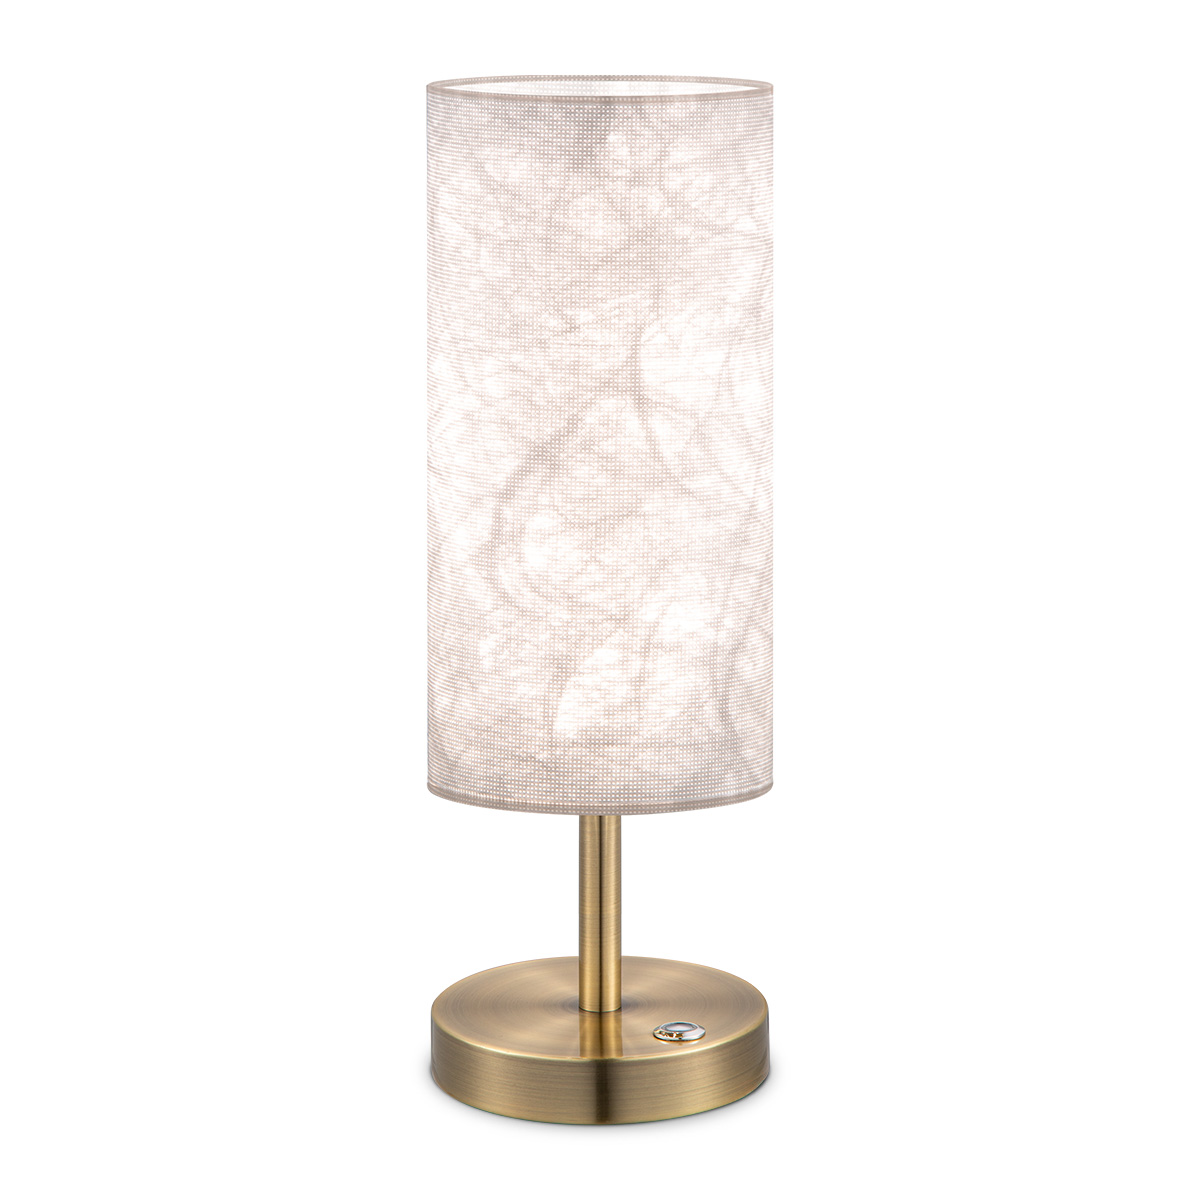 Tangla lighting - TLT7640-01AW - LED table lamp 1 Light - metal and fabric in white and brass - rechargeable - E27